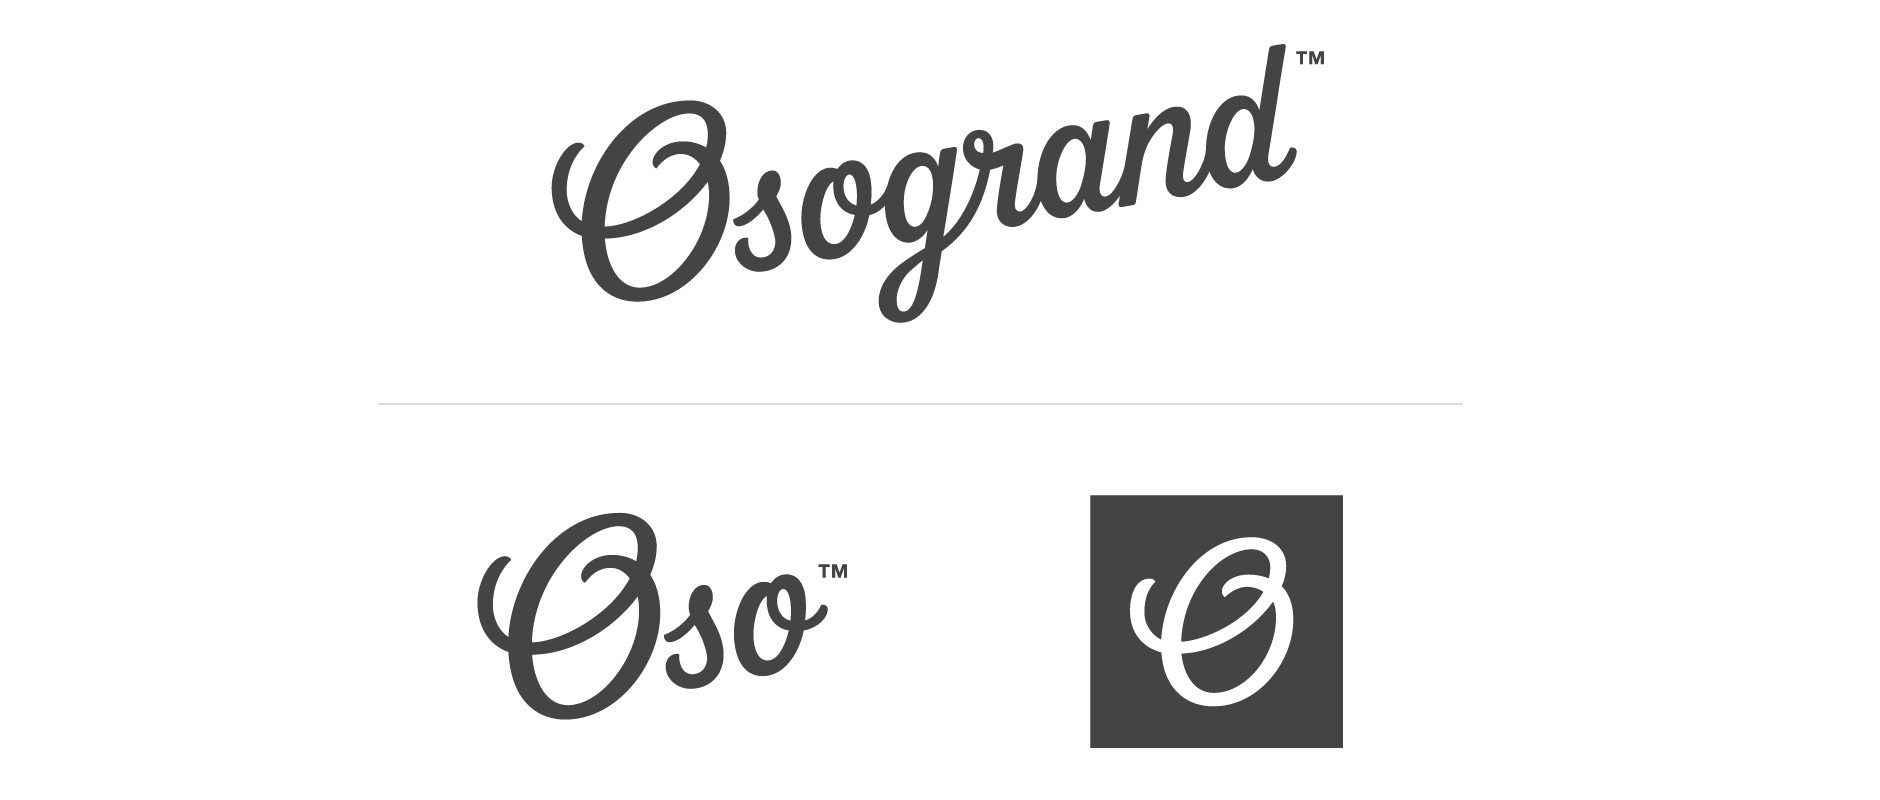 Claire Coullon // Osogrand Clothing Co. logo